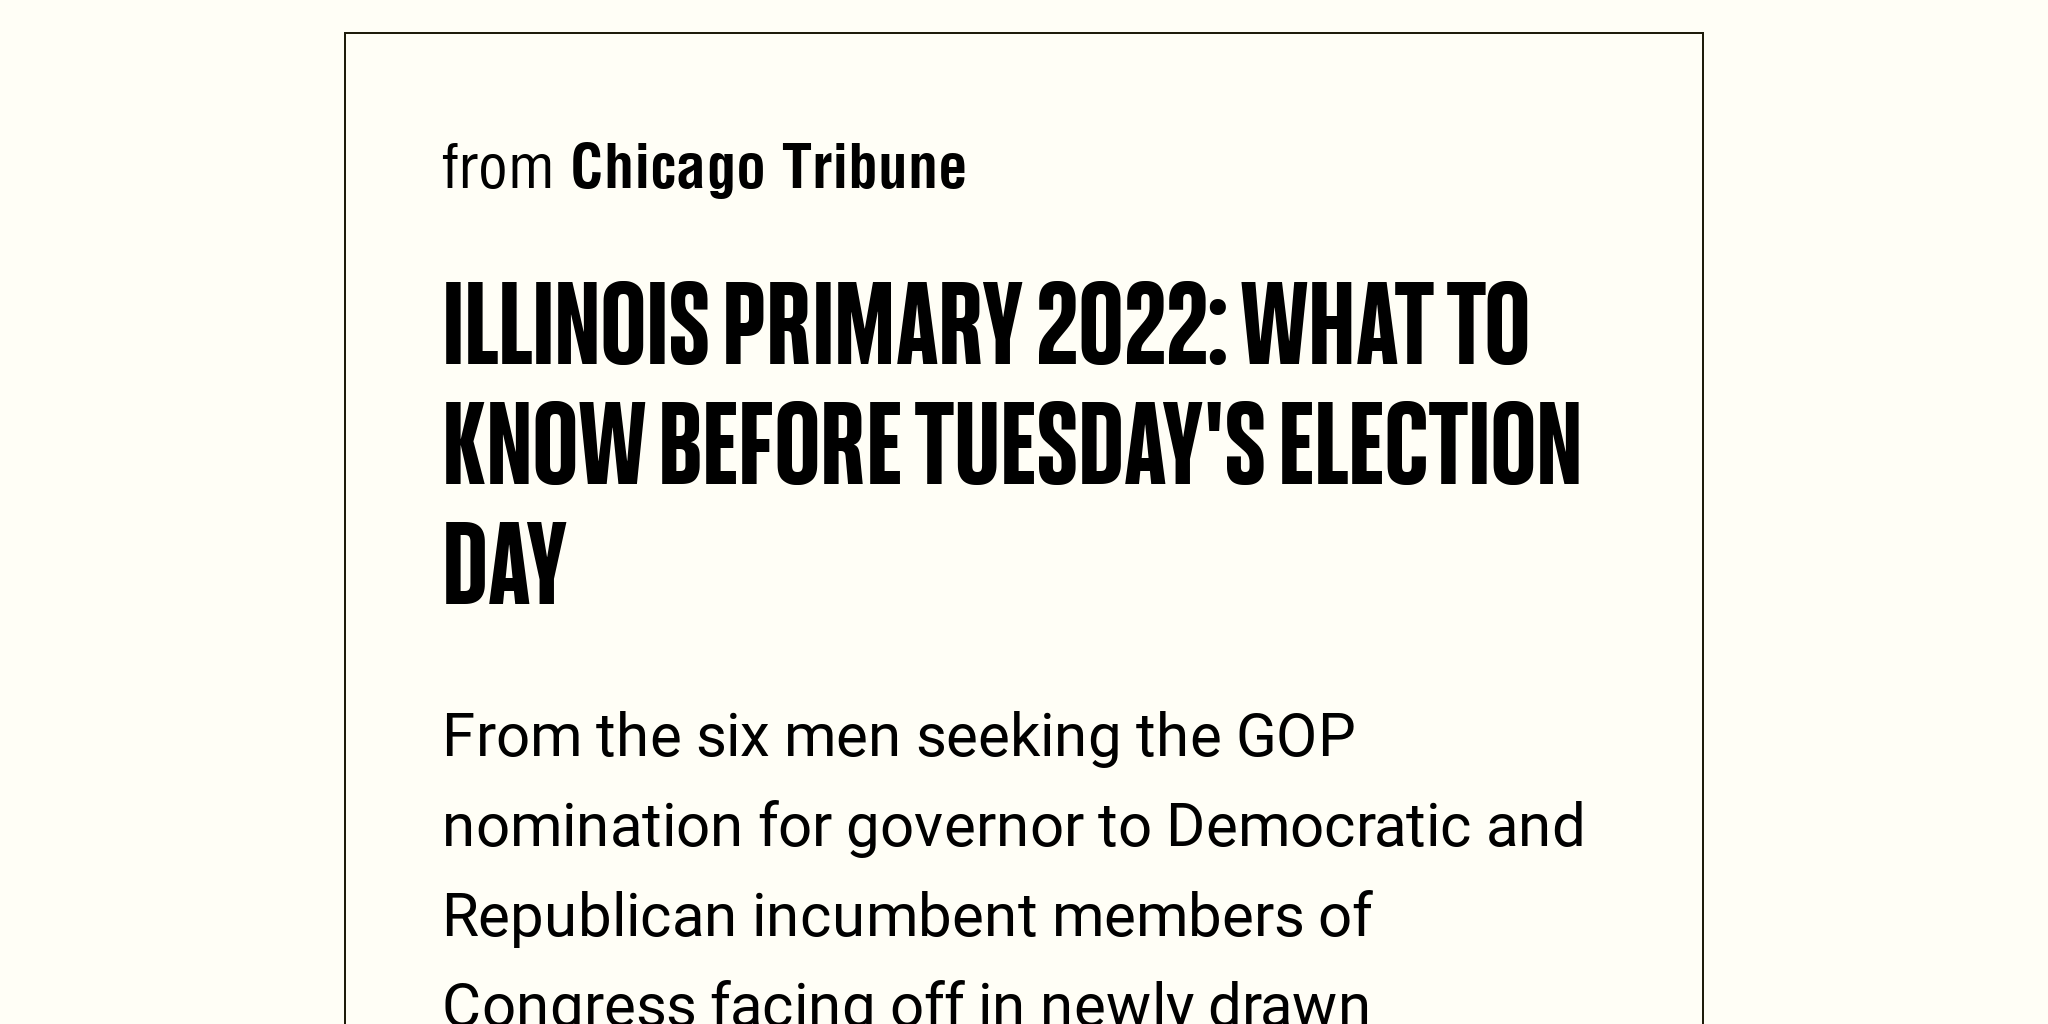 Illinois primary 2022 What to know before Tuesday's Election Day Briefly